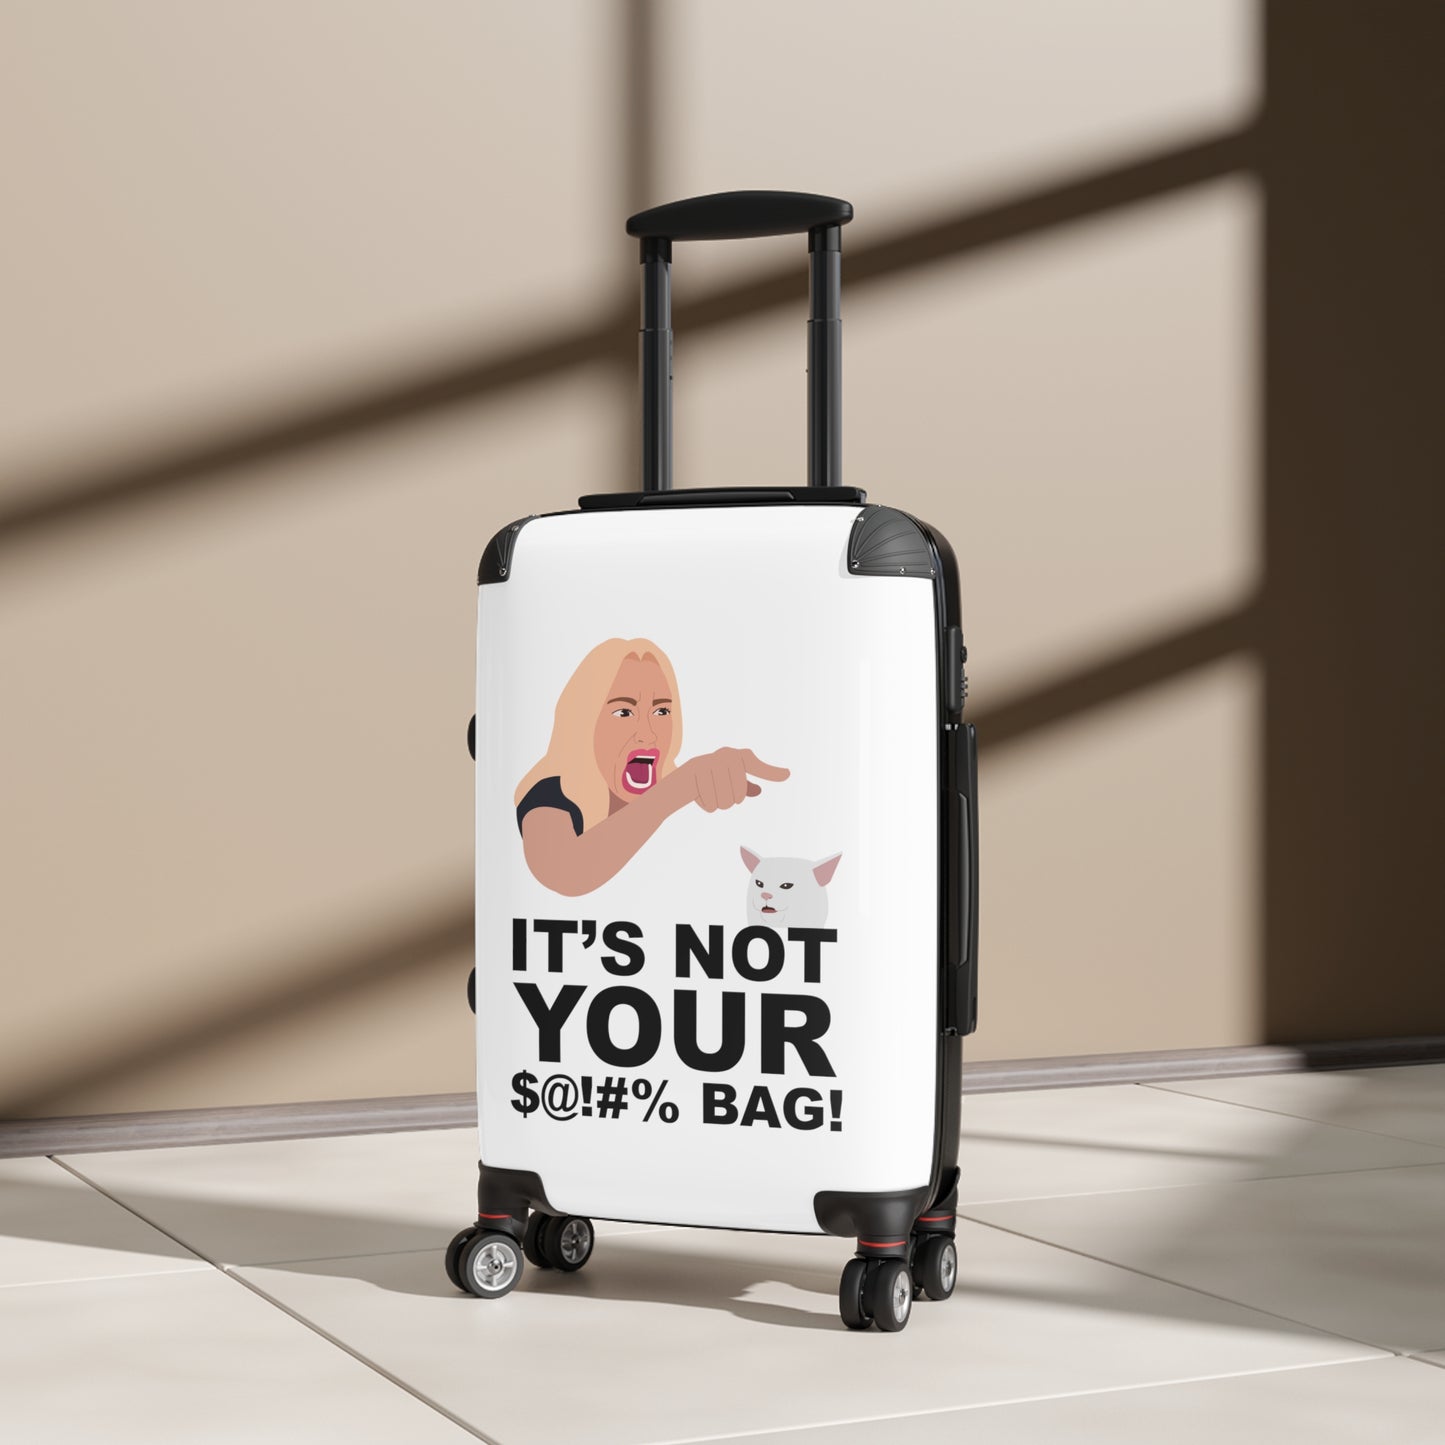 It's Not Your $@!#% Bag!–Suitcase